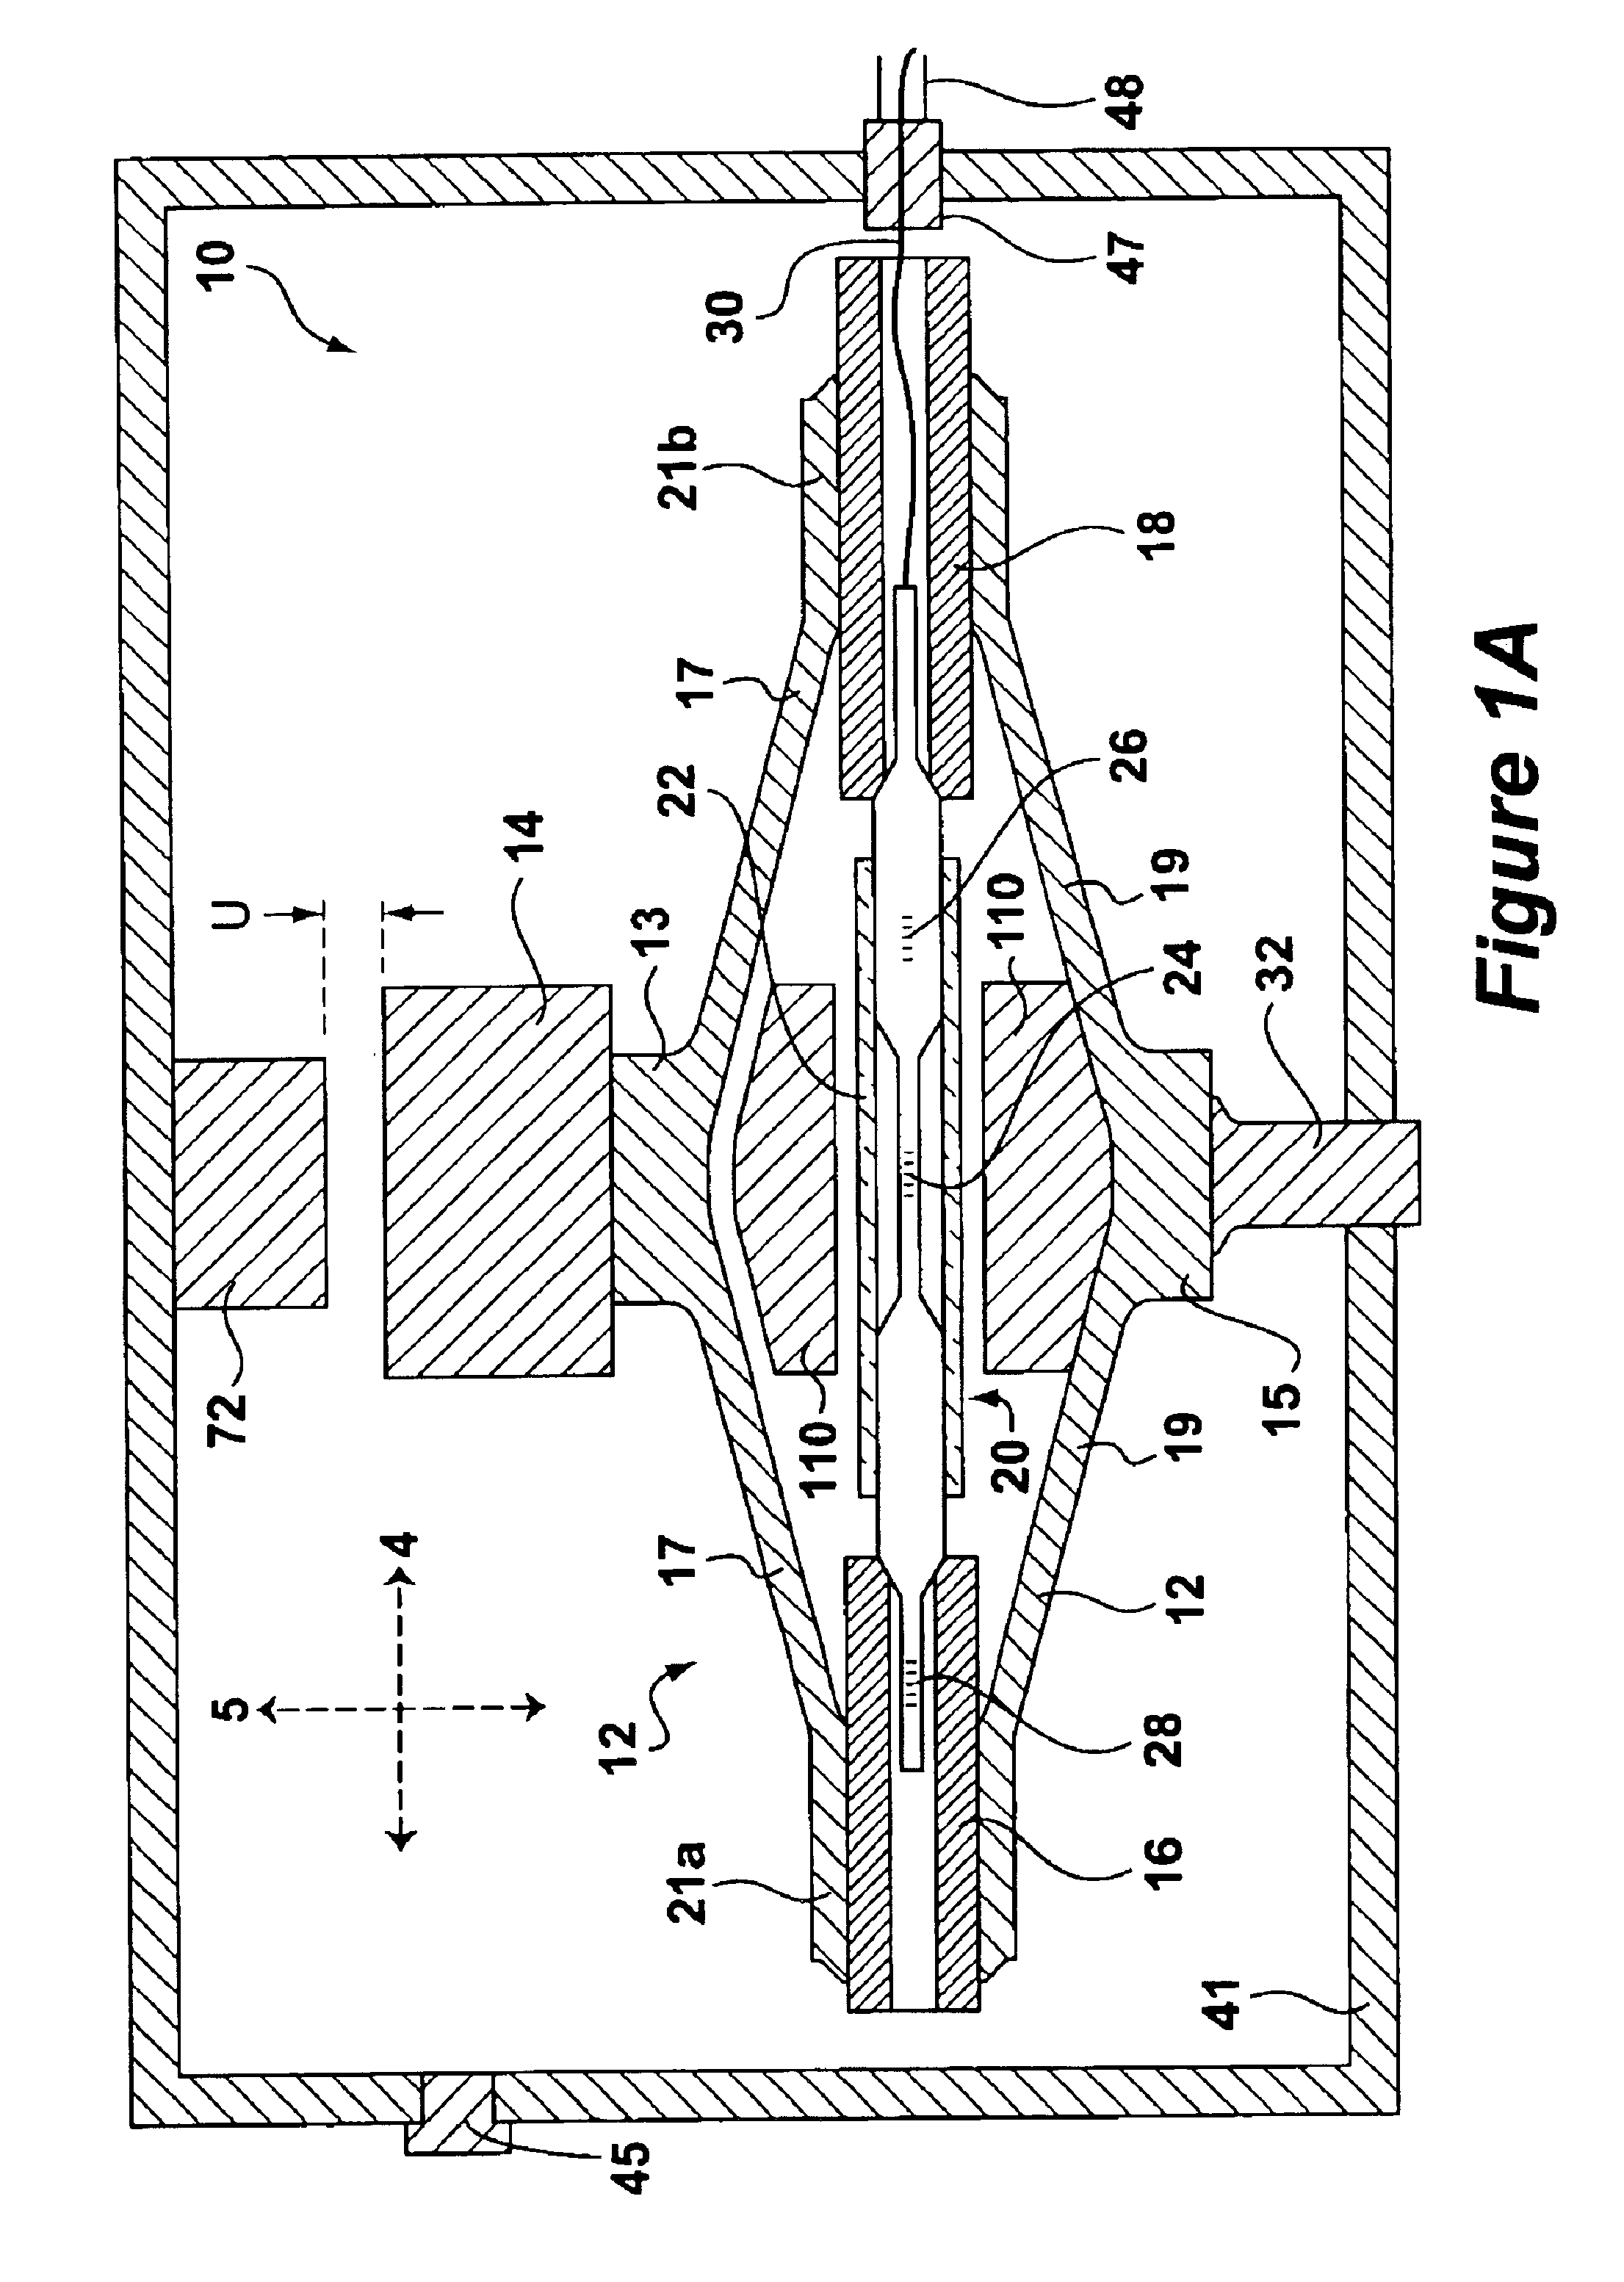 Optical accelerometer or displacement device using a flexure system